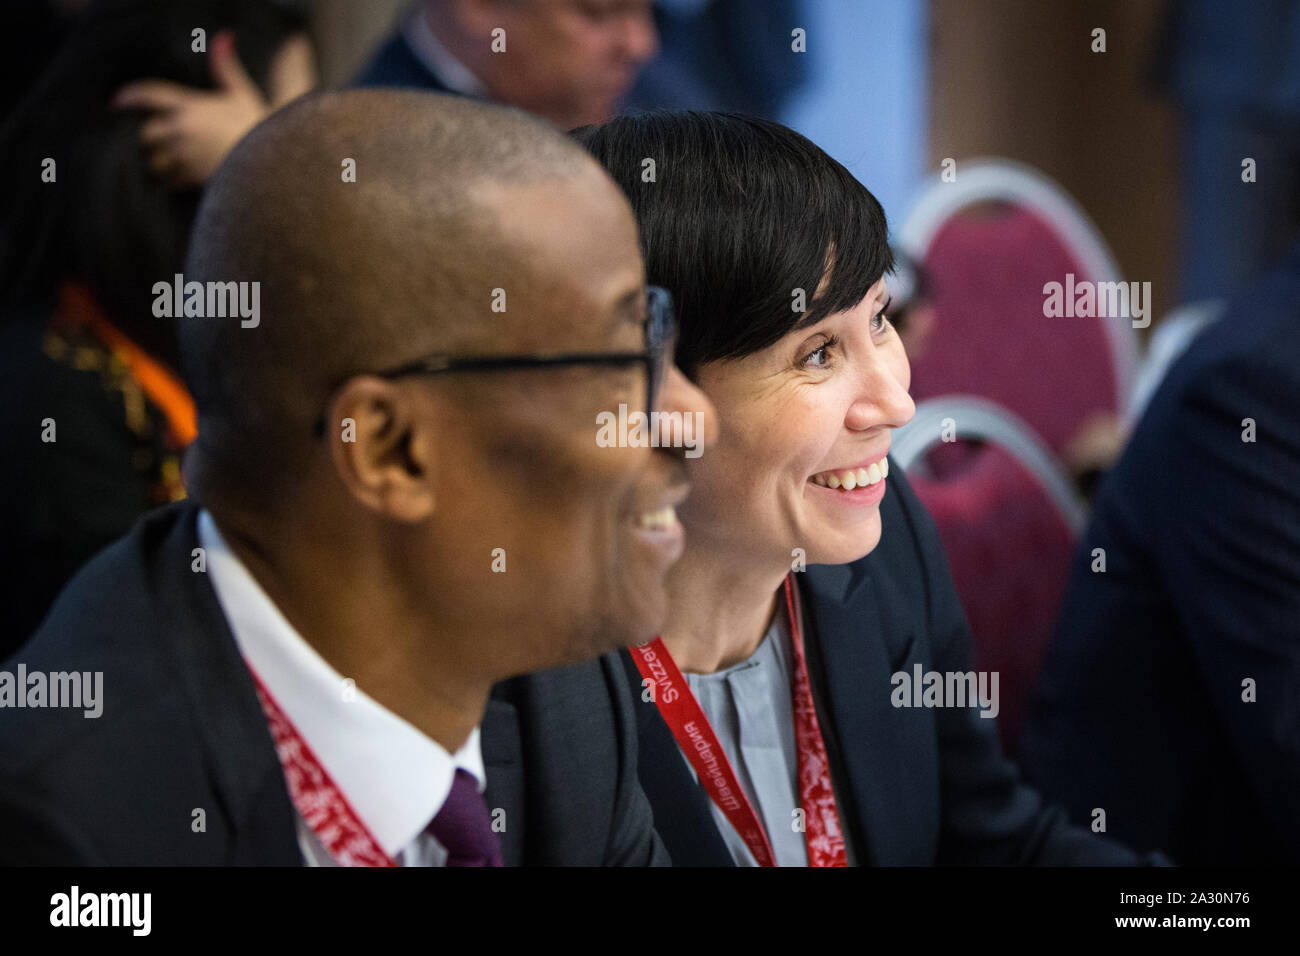 Norwegian Minister of Foreign Affairs Ine Eriksen Søreide at a WTO meeting during the WEF in Davos. Here she is together with the Nigeria Minister of Trade Okechukwu Enelamah. Stock Photo